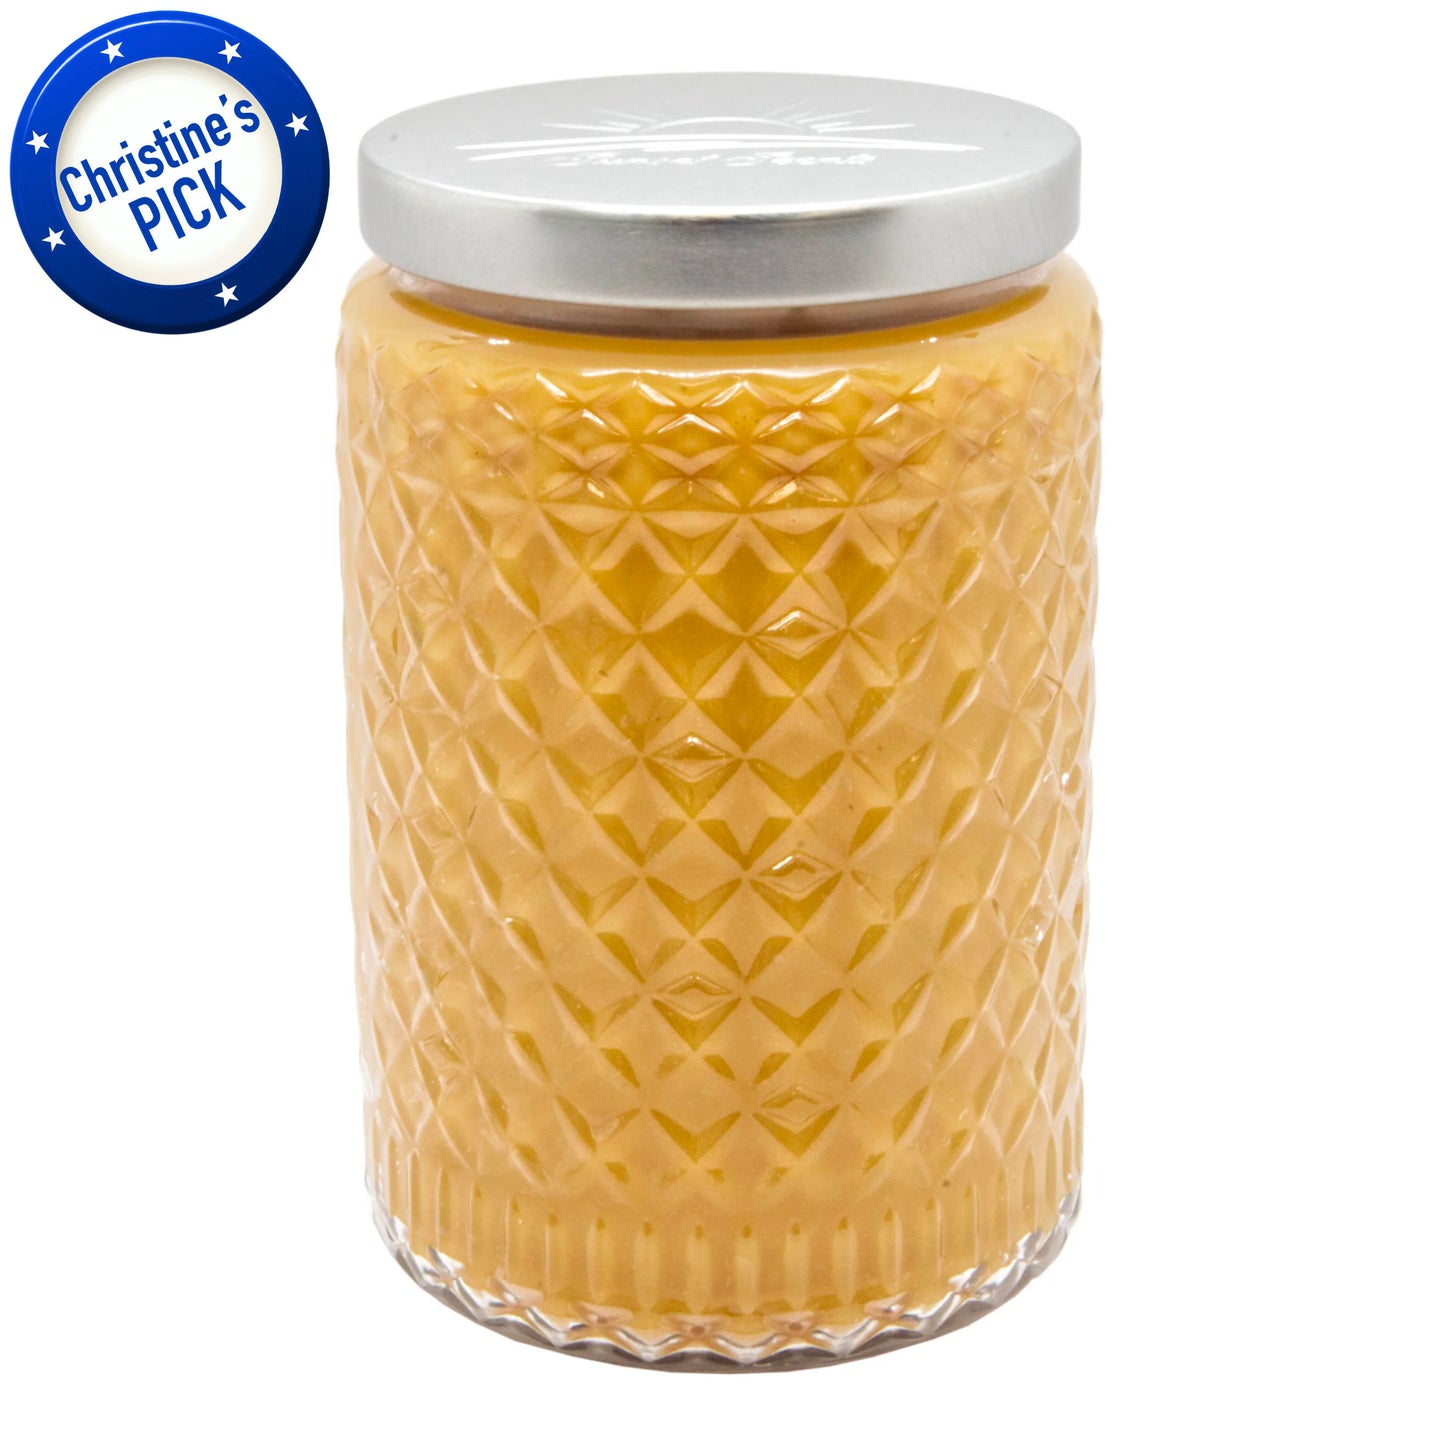 Pumpkin Pie Scented Candle pick